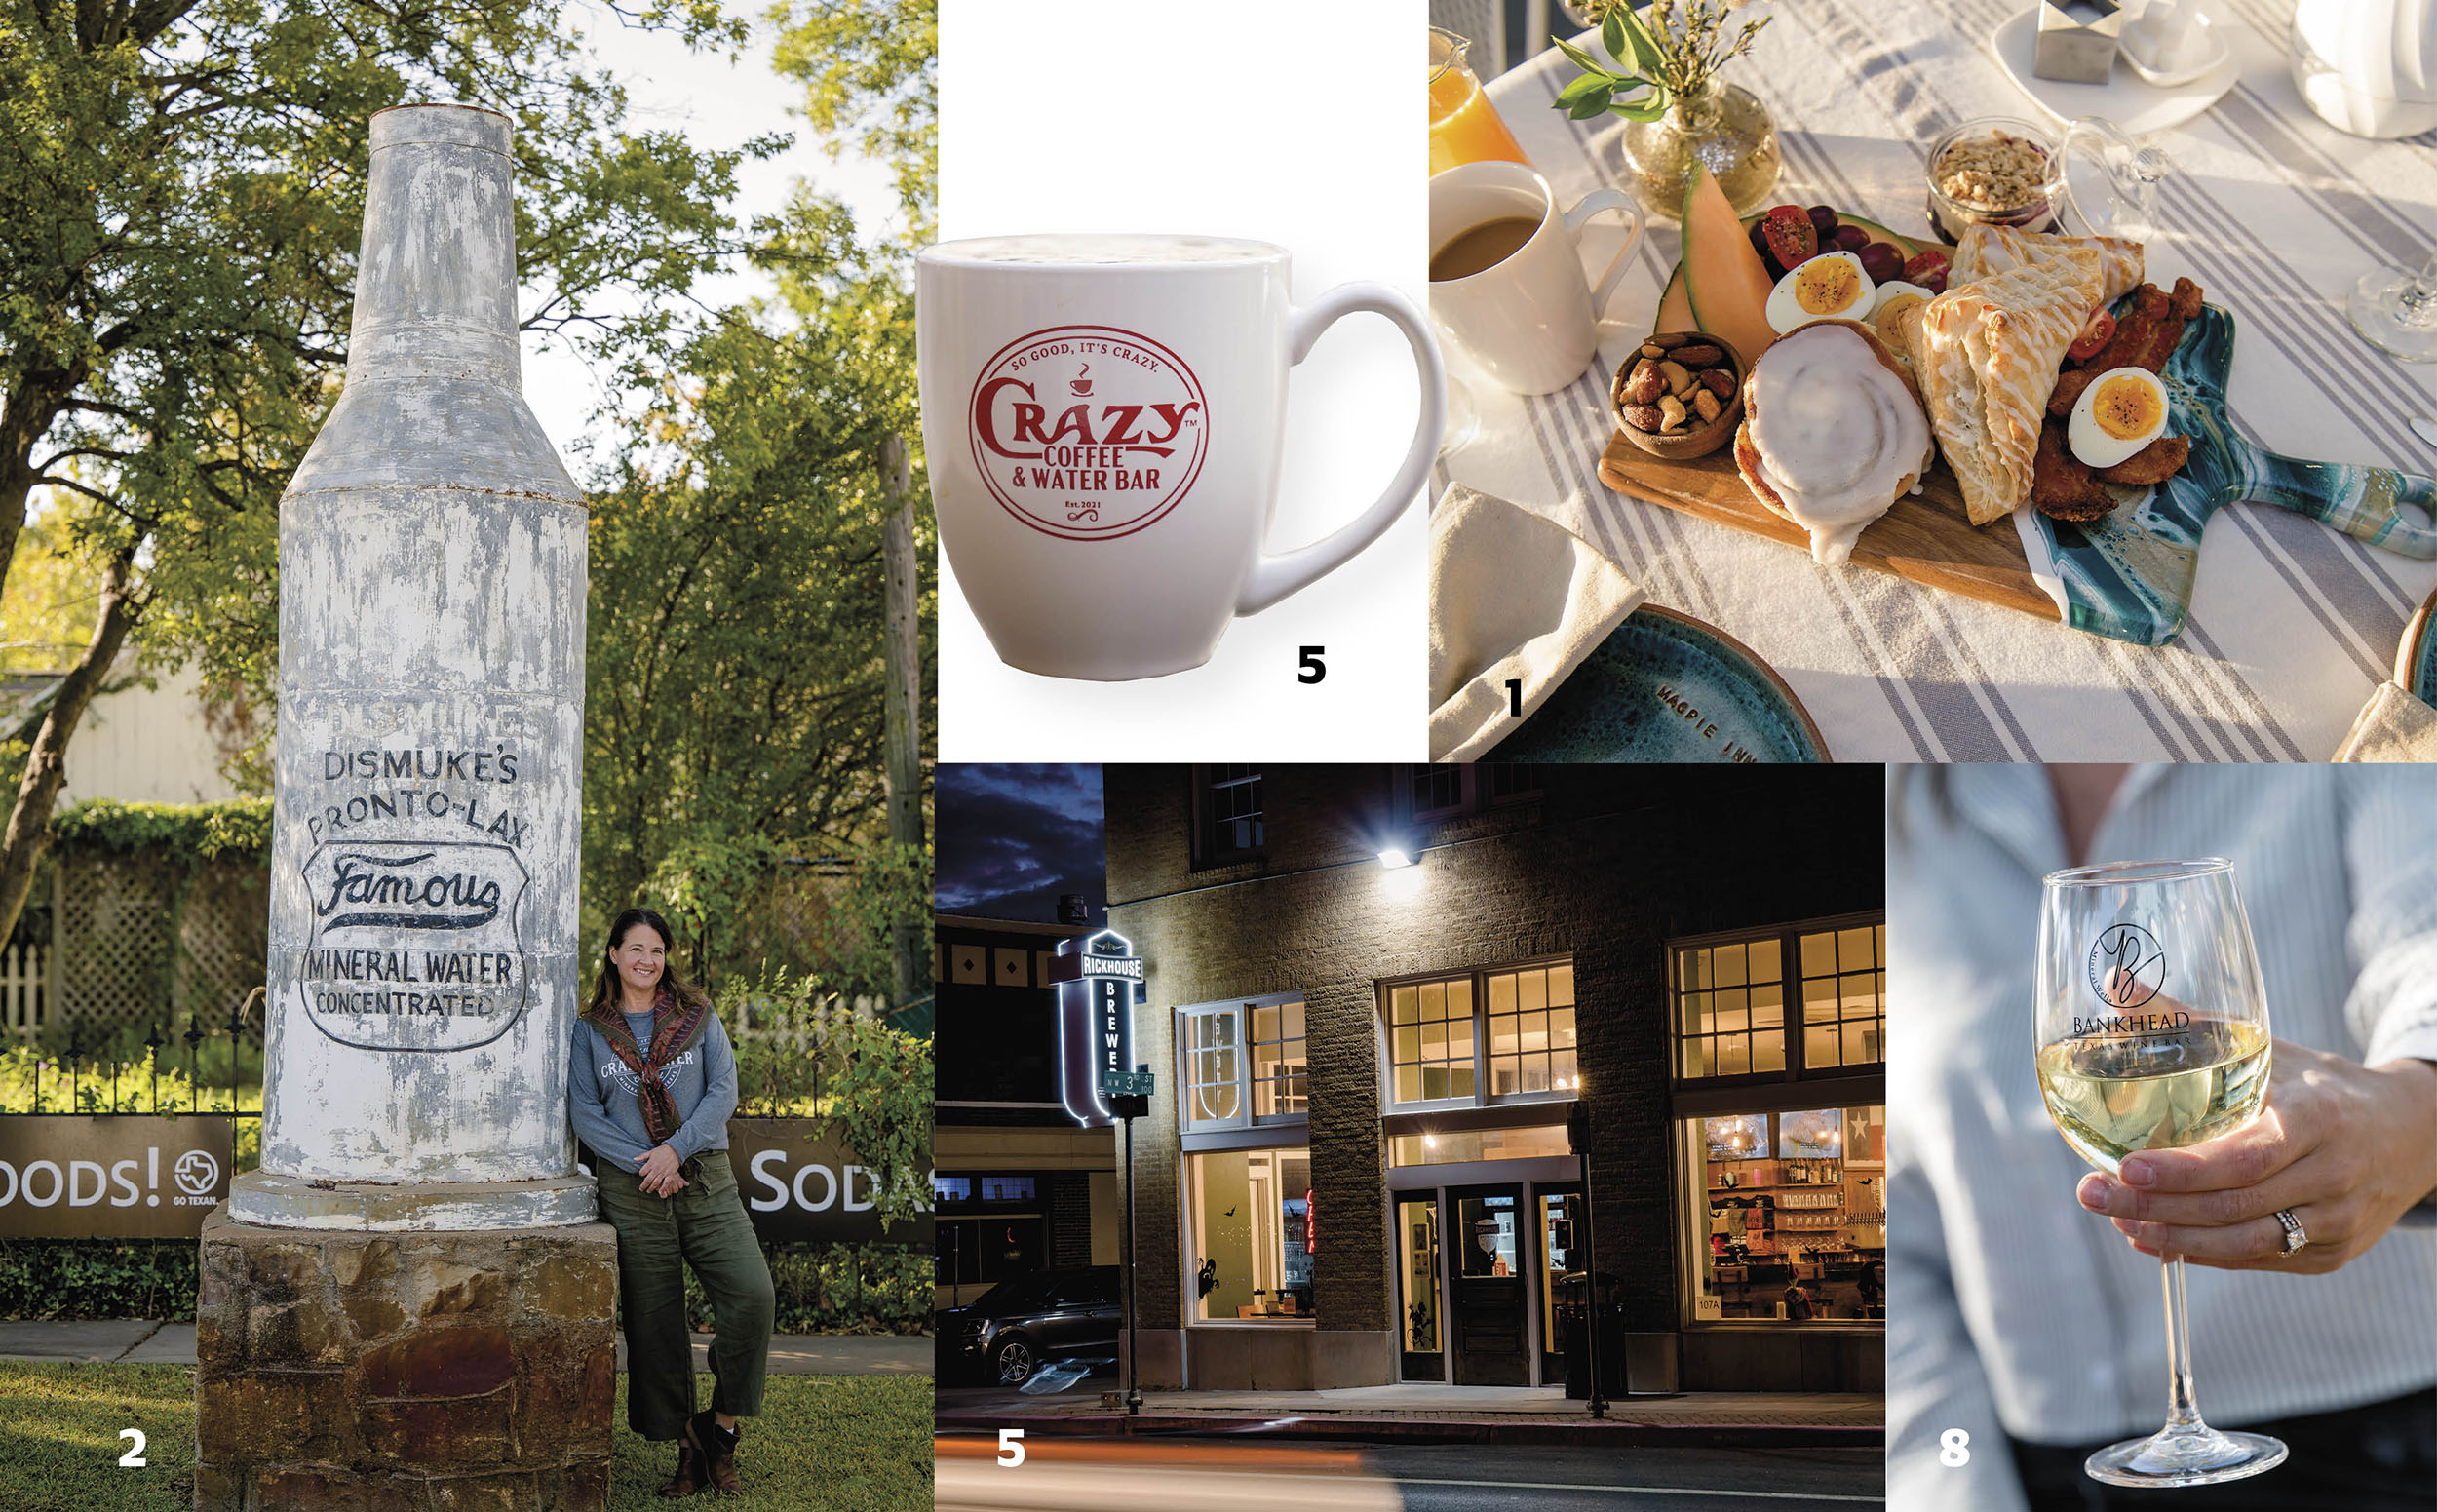 A collage of the places and eateries featured in this article